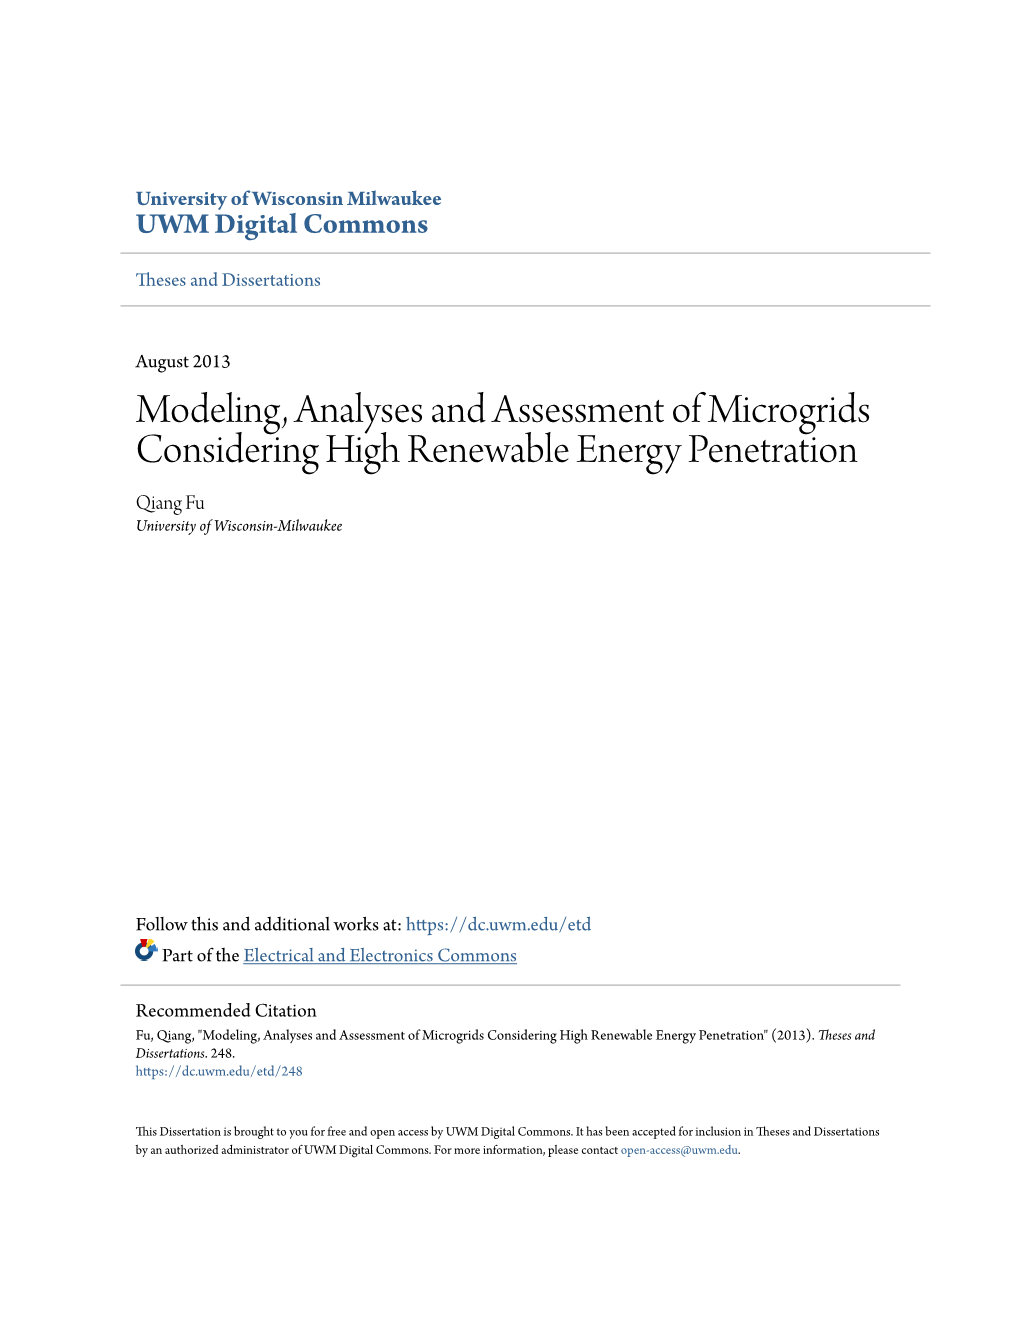 Modeling, Analyses and Assessment of Microgrids Considering High Renewable Energy Penetration Qiang Fu University of Wisconsin-Milwaukee